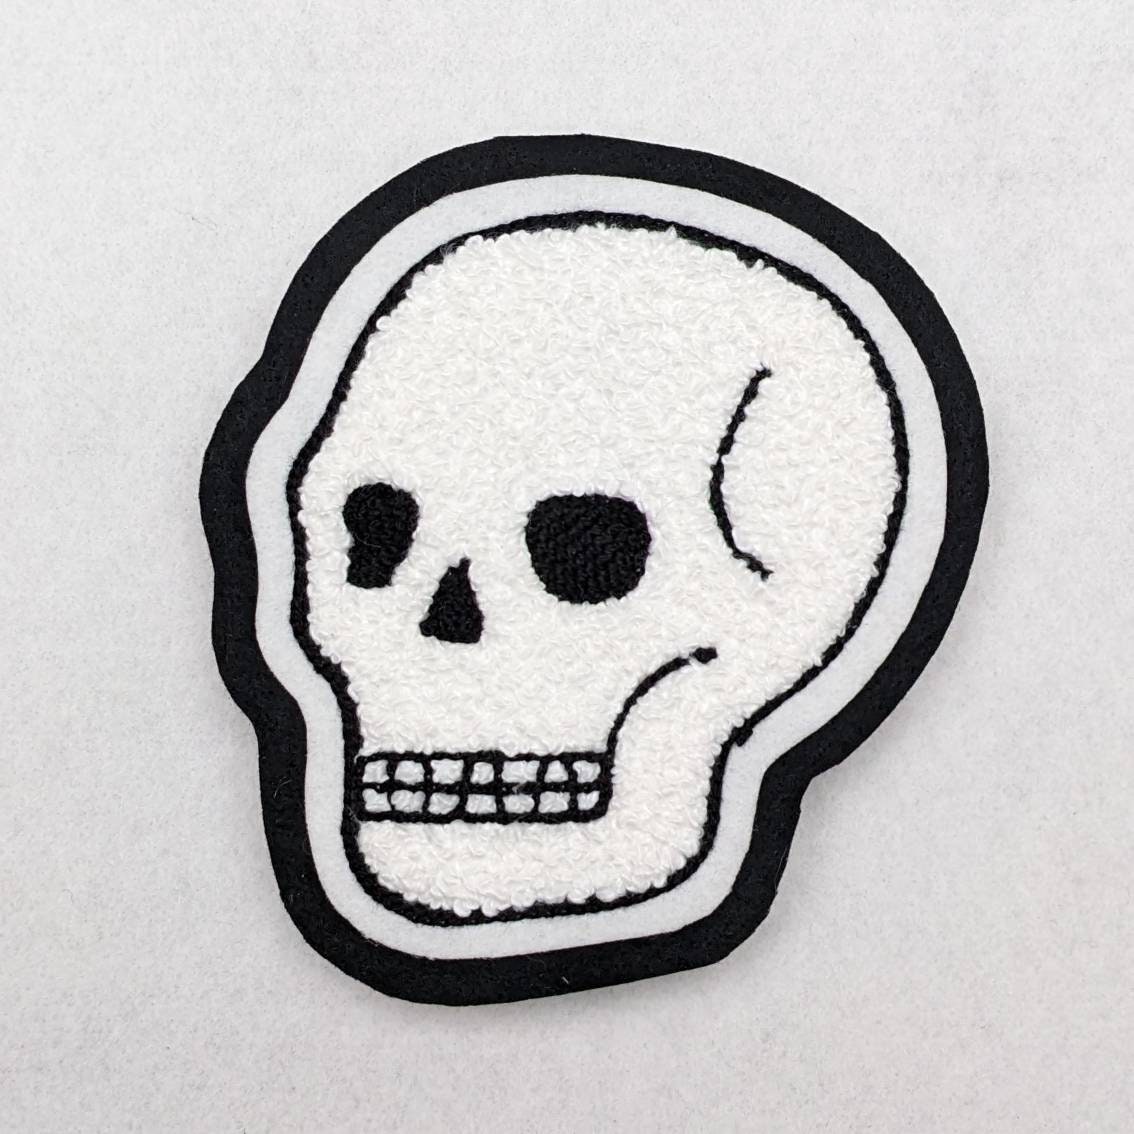 Large Iron On Patch • Embroidered Patch • Custom - Cloths - Punk - Vintage  • 1x Patch • Motor Head Skull